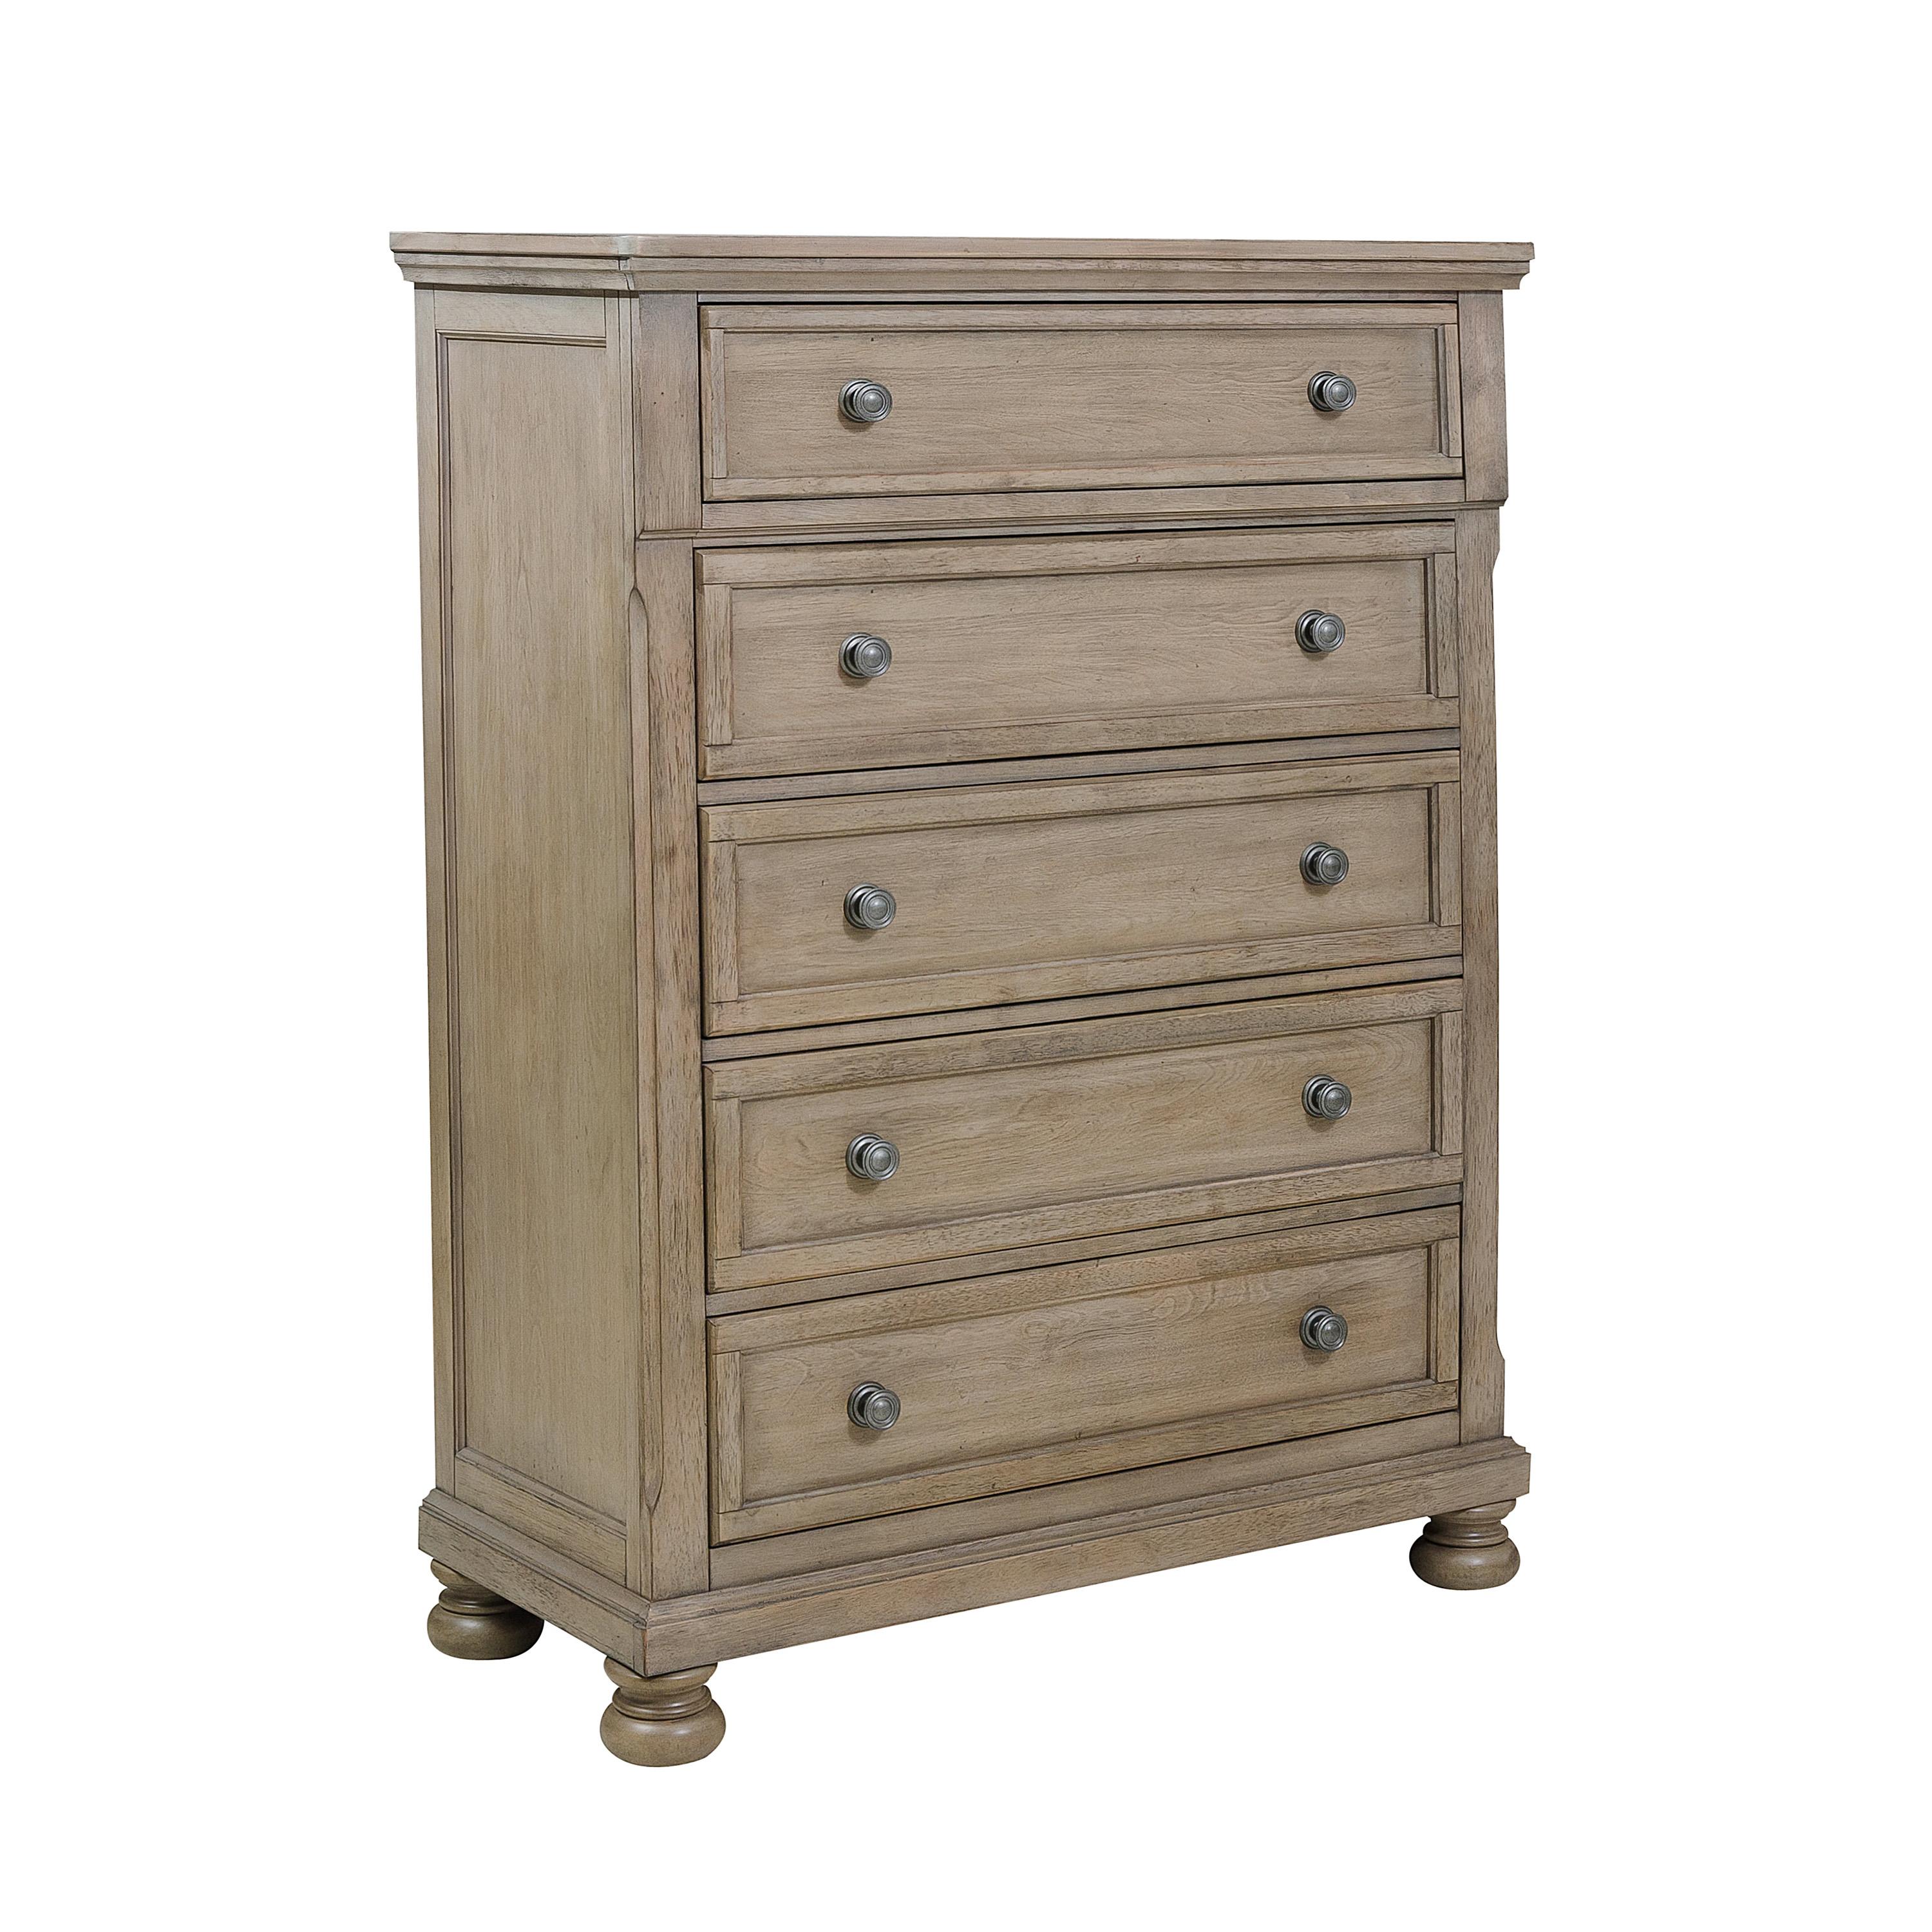 Transitional Chest 2259GY-9 Bethel 2259GY-9 in Gray 